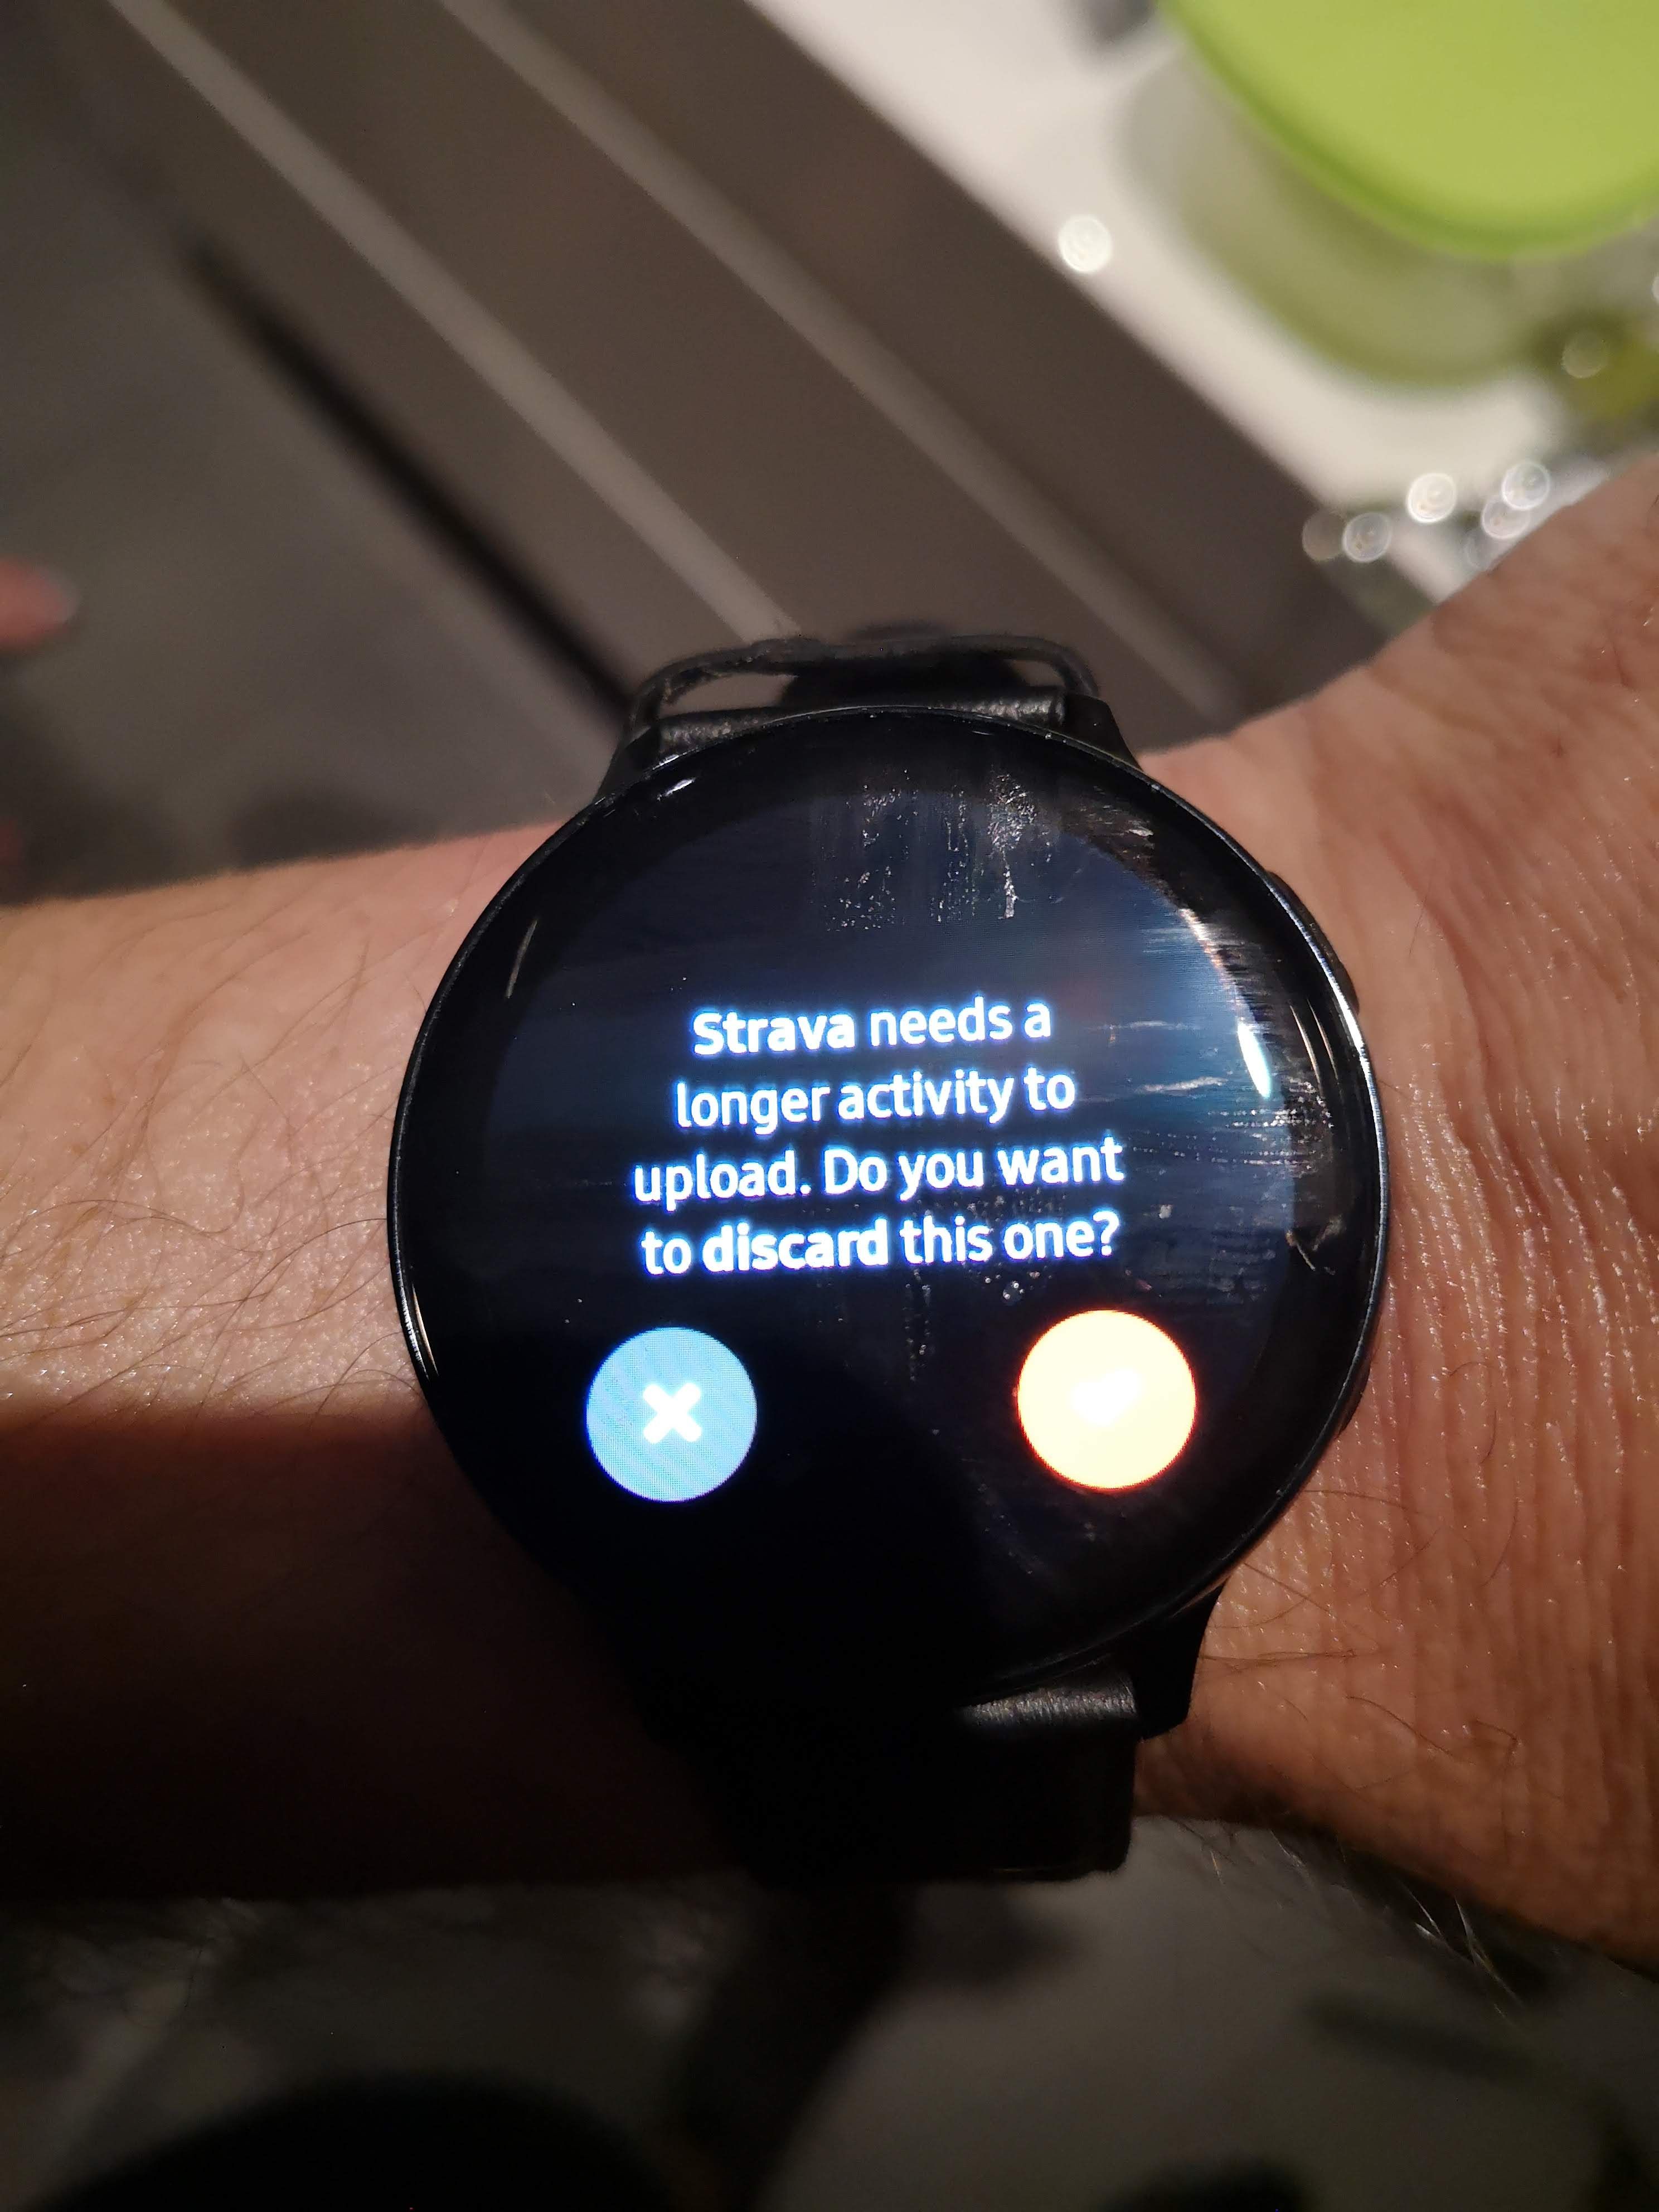 Galaxy Watch Active 2: Strava needs a longer activity to upload - Page 2 -  Samsung Community